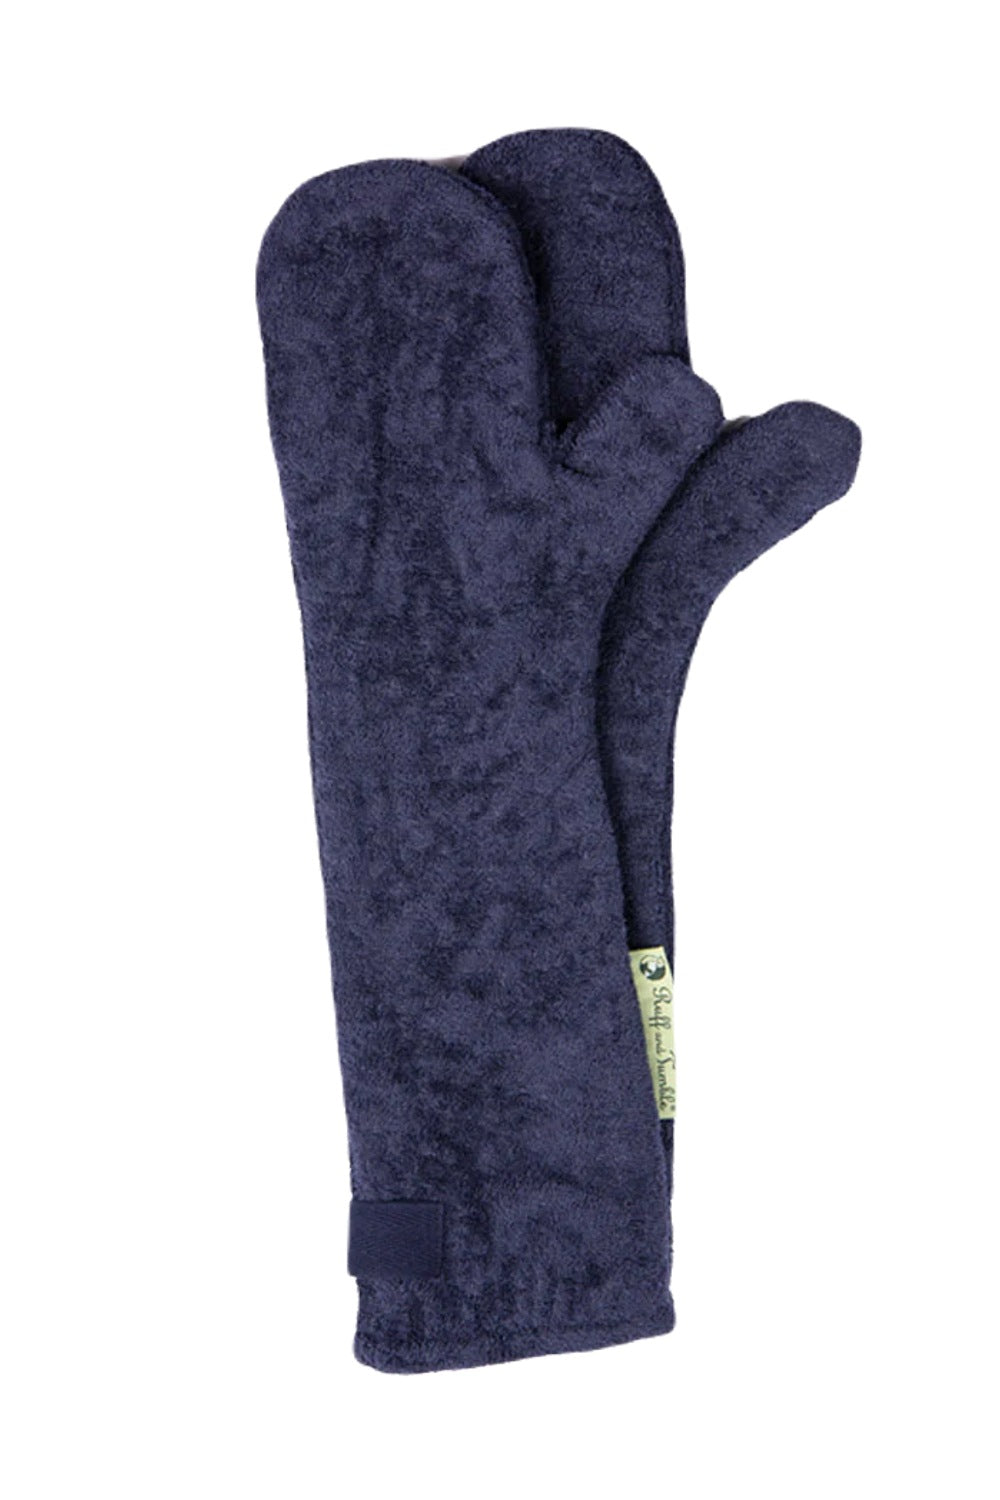 Ruff and Tumble Dog Drying Mitts in Navy 